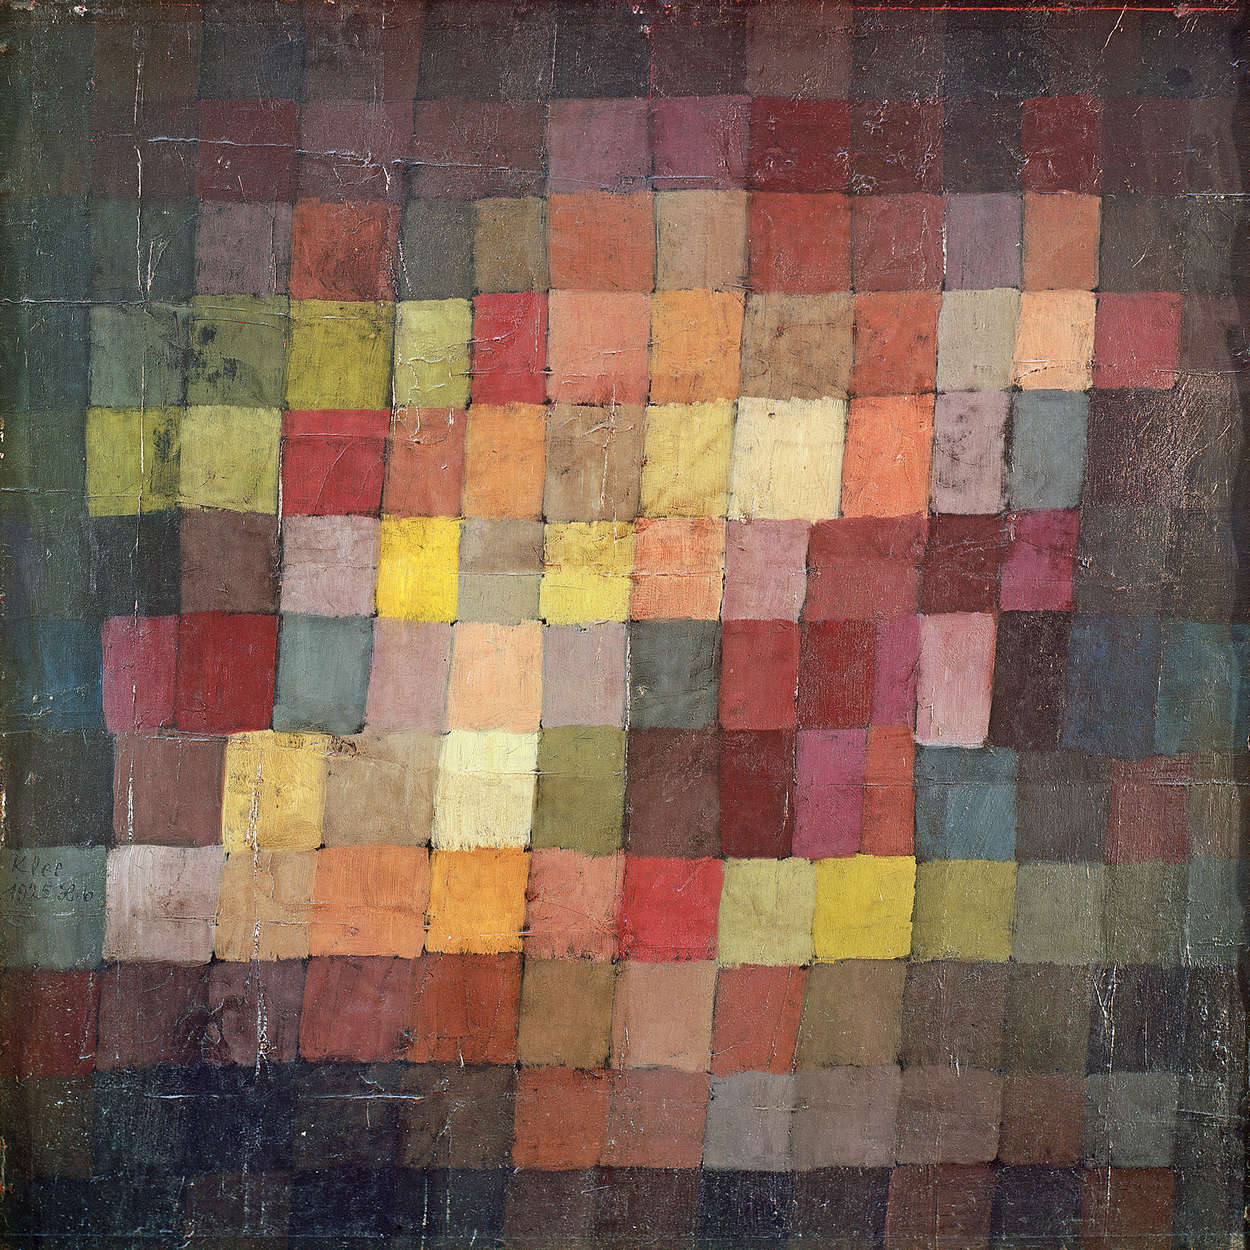             Photo wallpaper "Old harmony" by Paul Klee
        